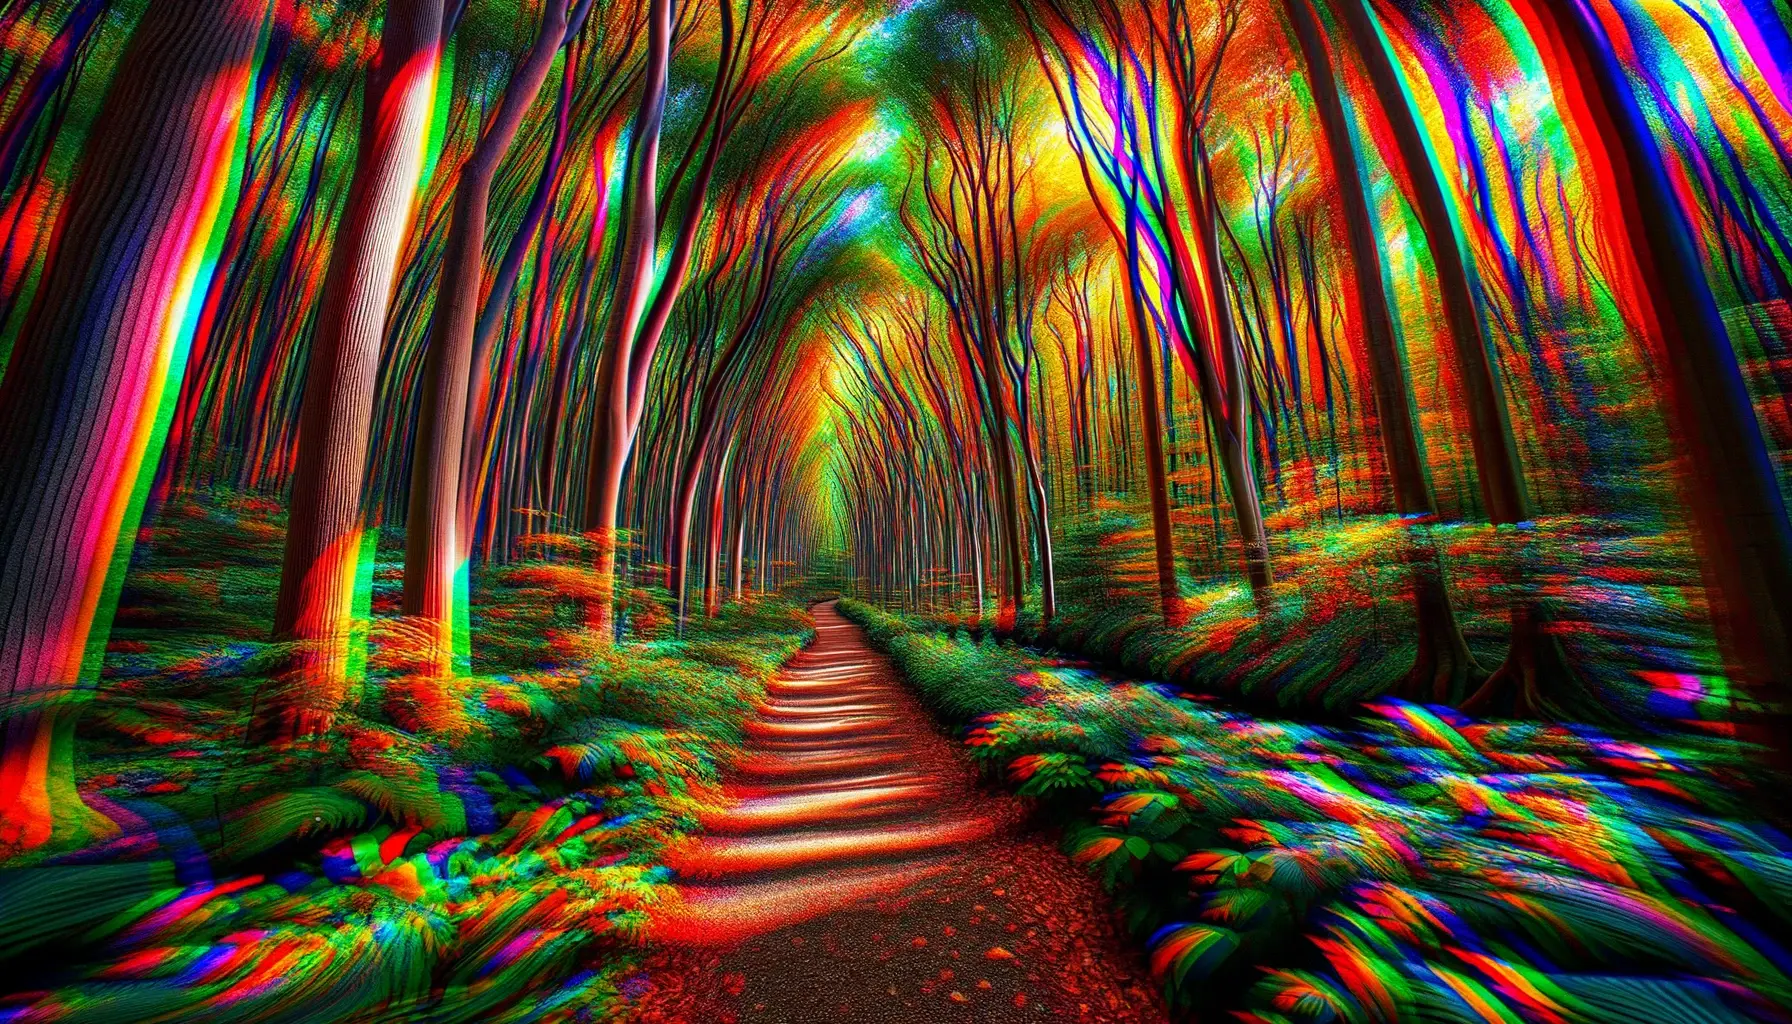 Photo of a forest path where the trees and plants appear to sway and move, their colors intensified, representing the visual distortions of hallucination.